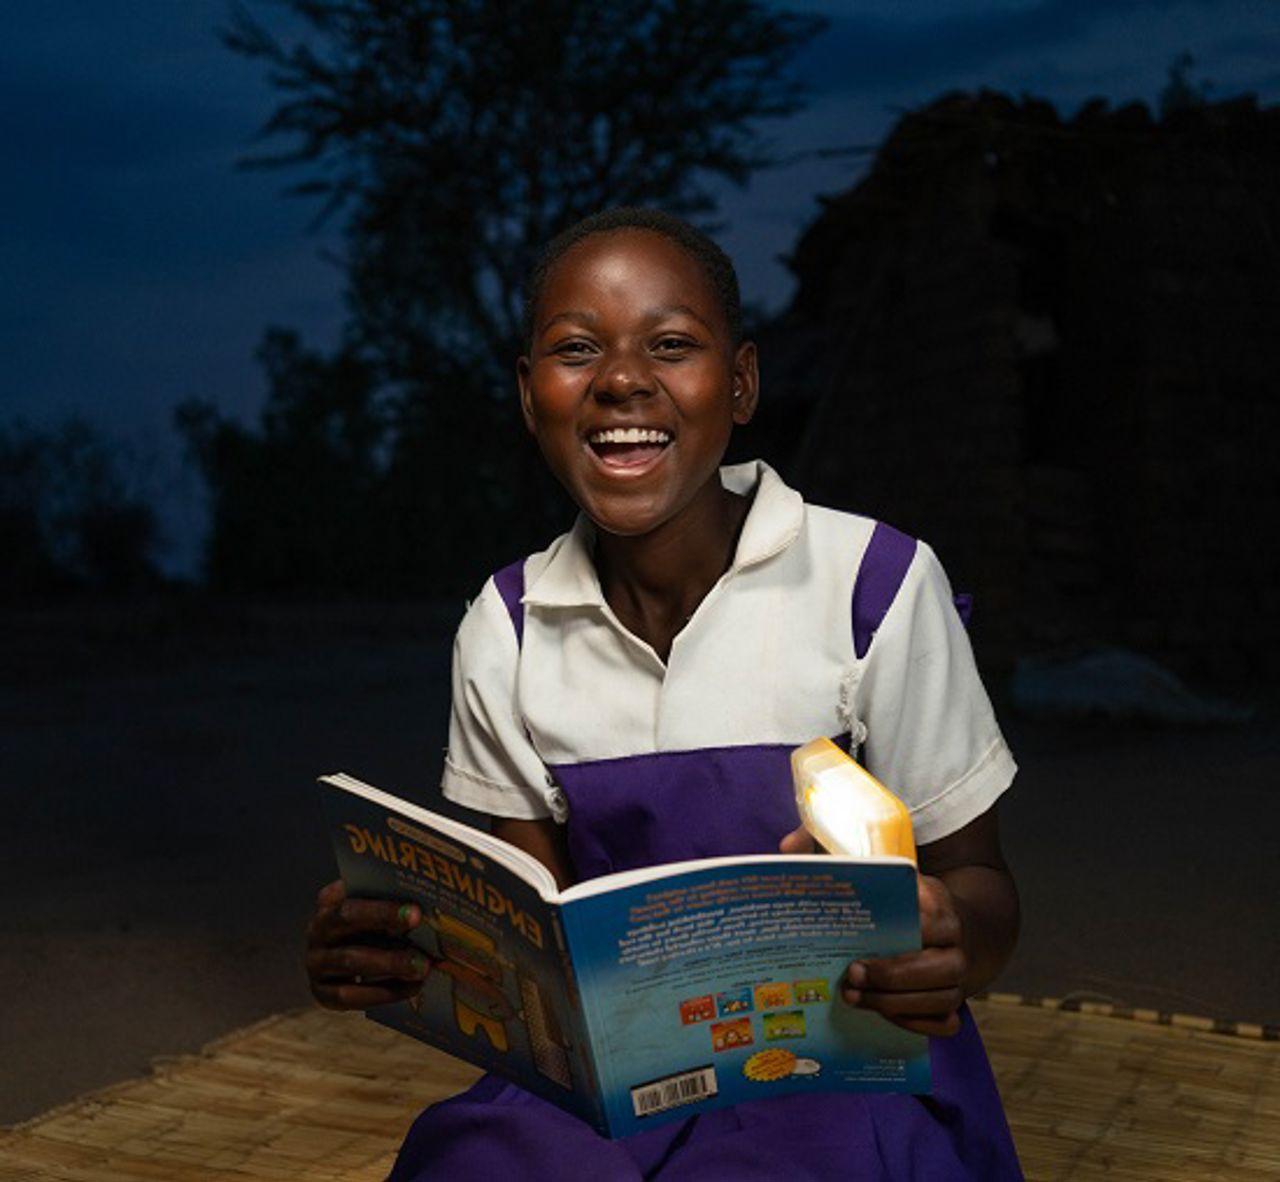 Girl looking into the camera smiling, holding a book